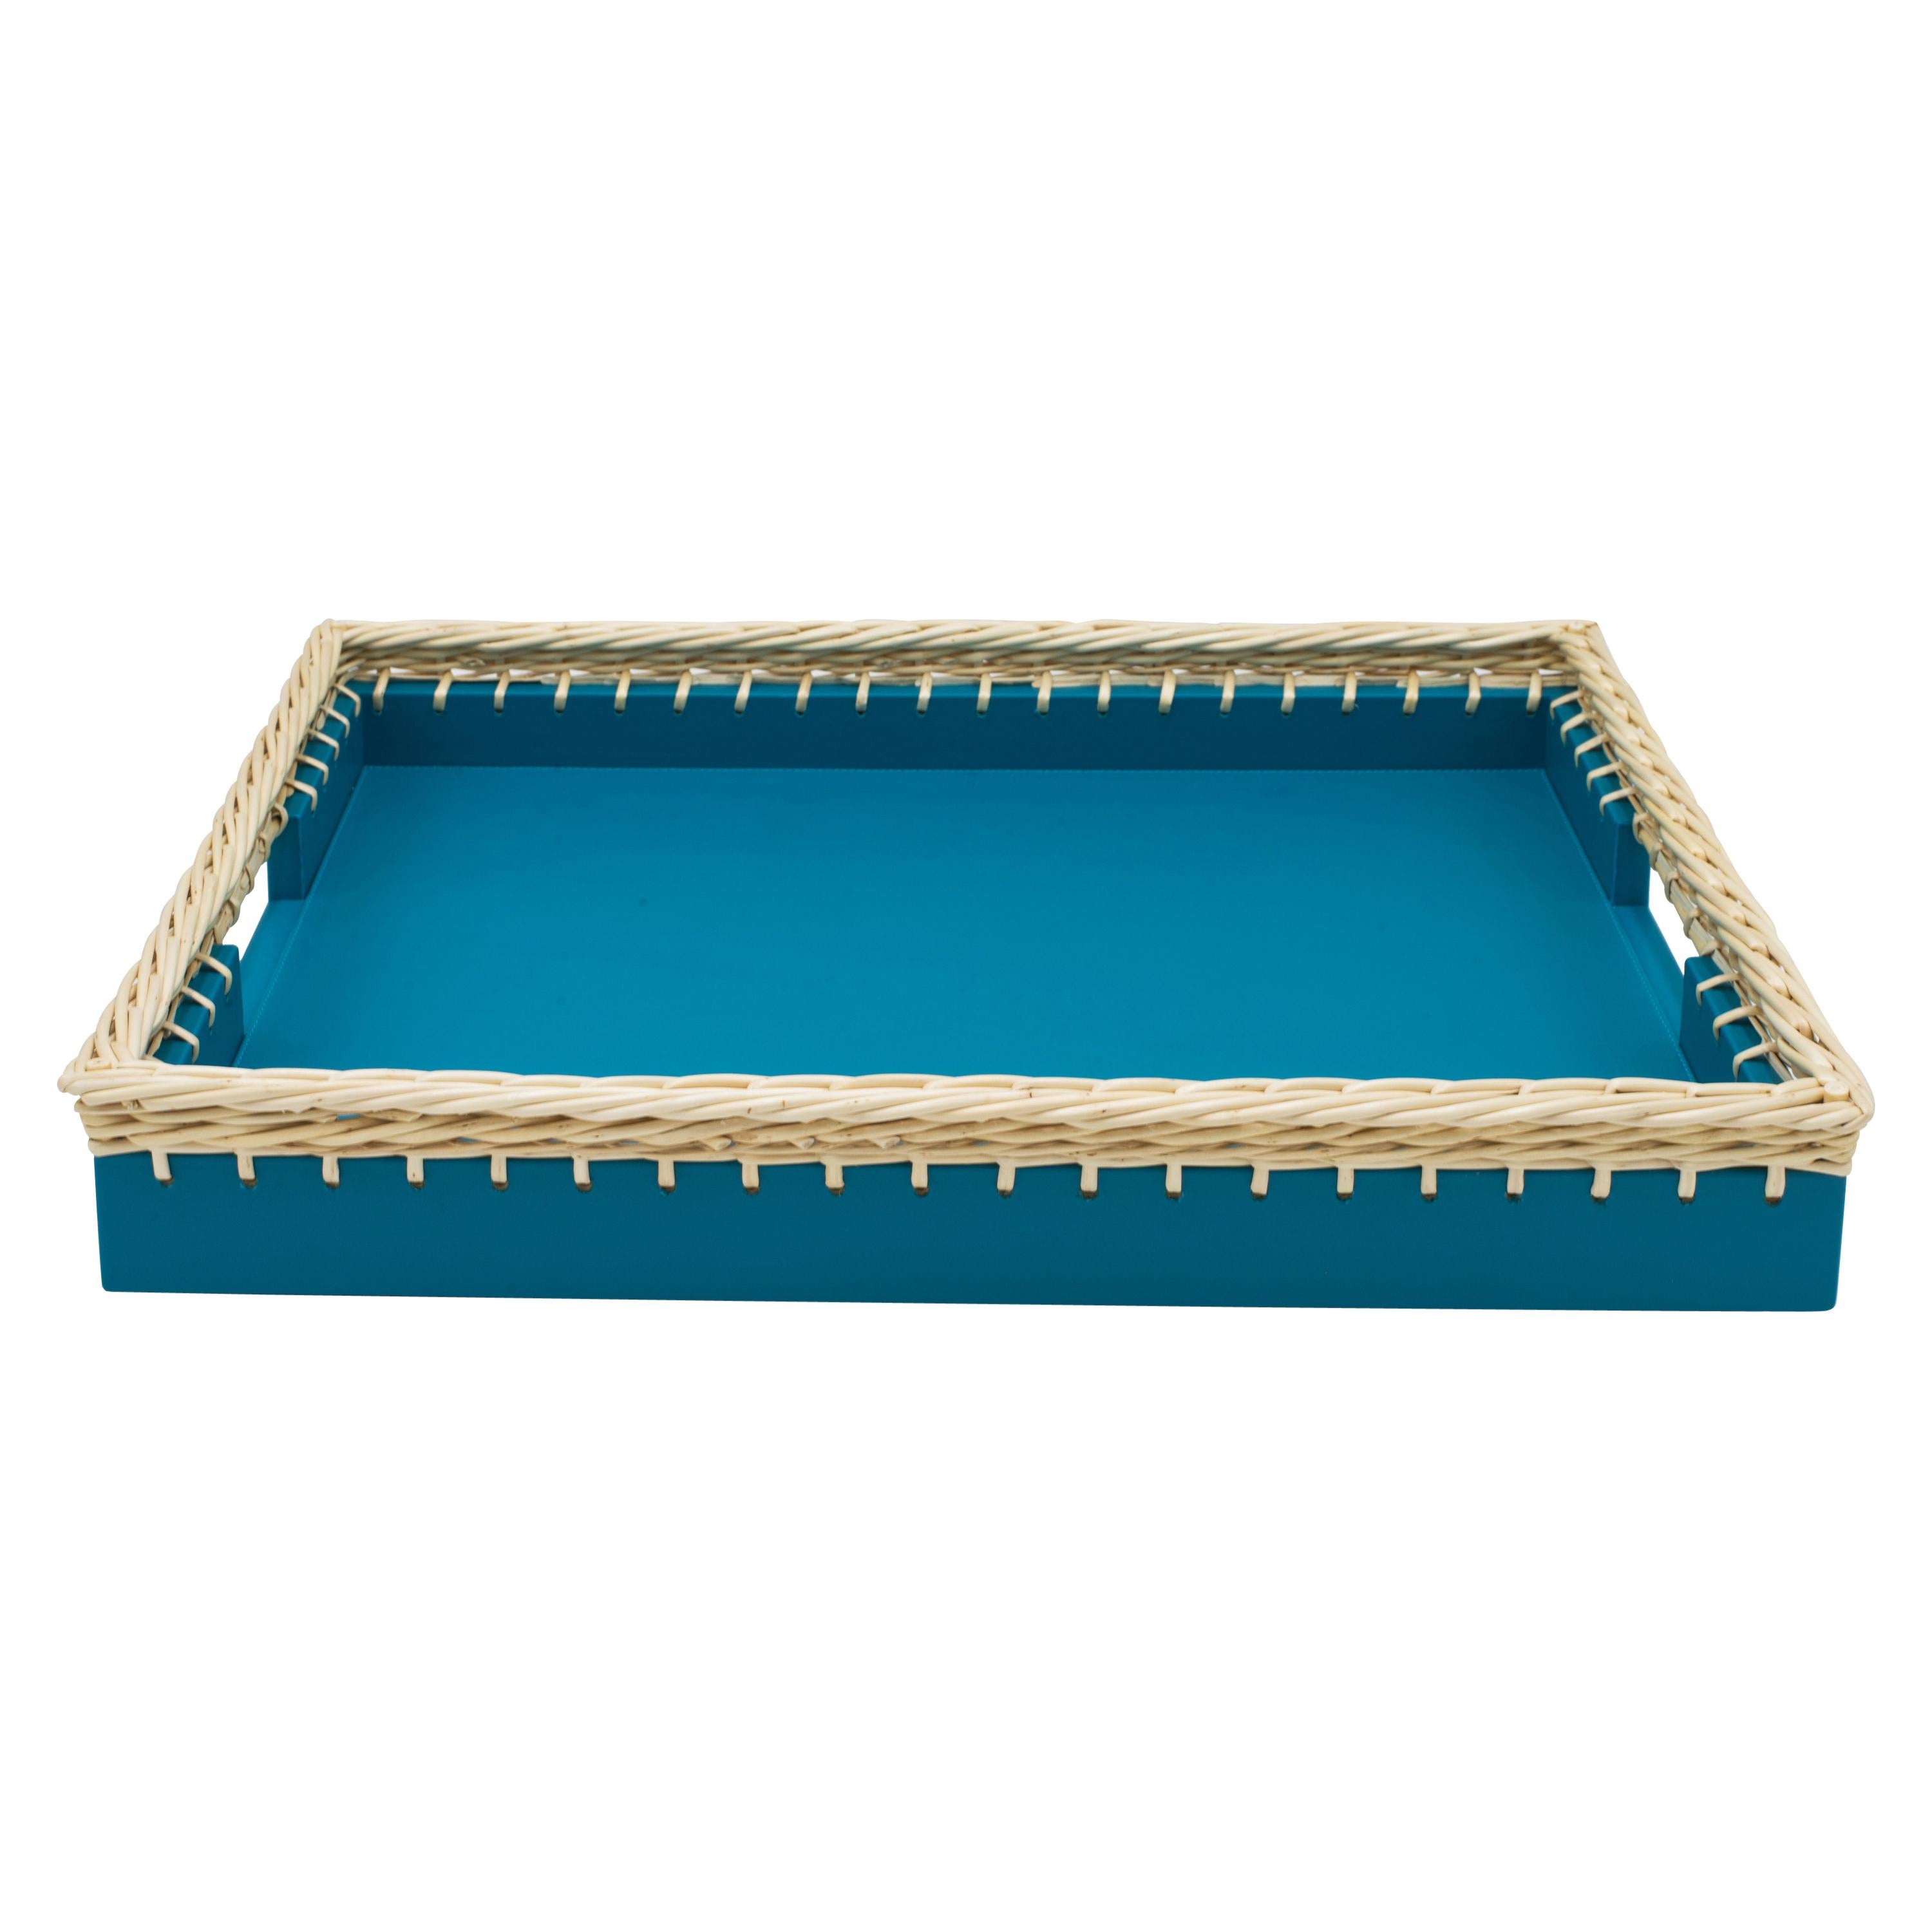 Contemporary Italian Blue Leather and Wicker Tray